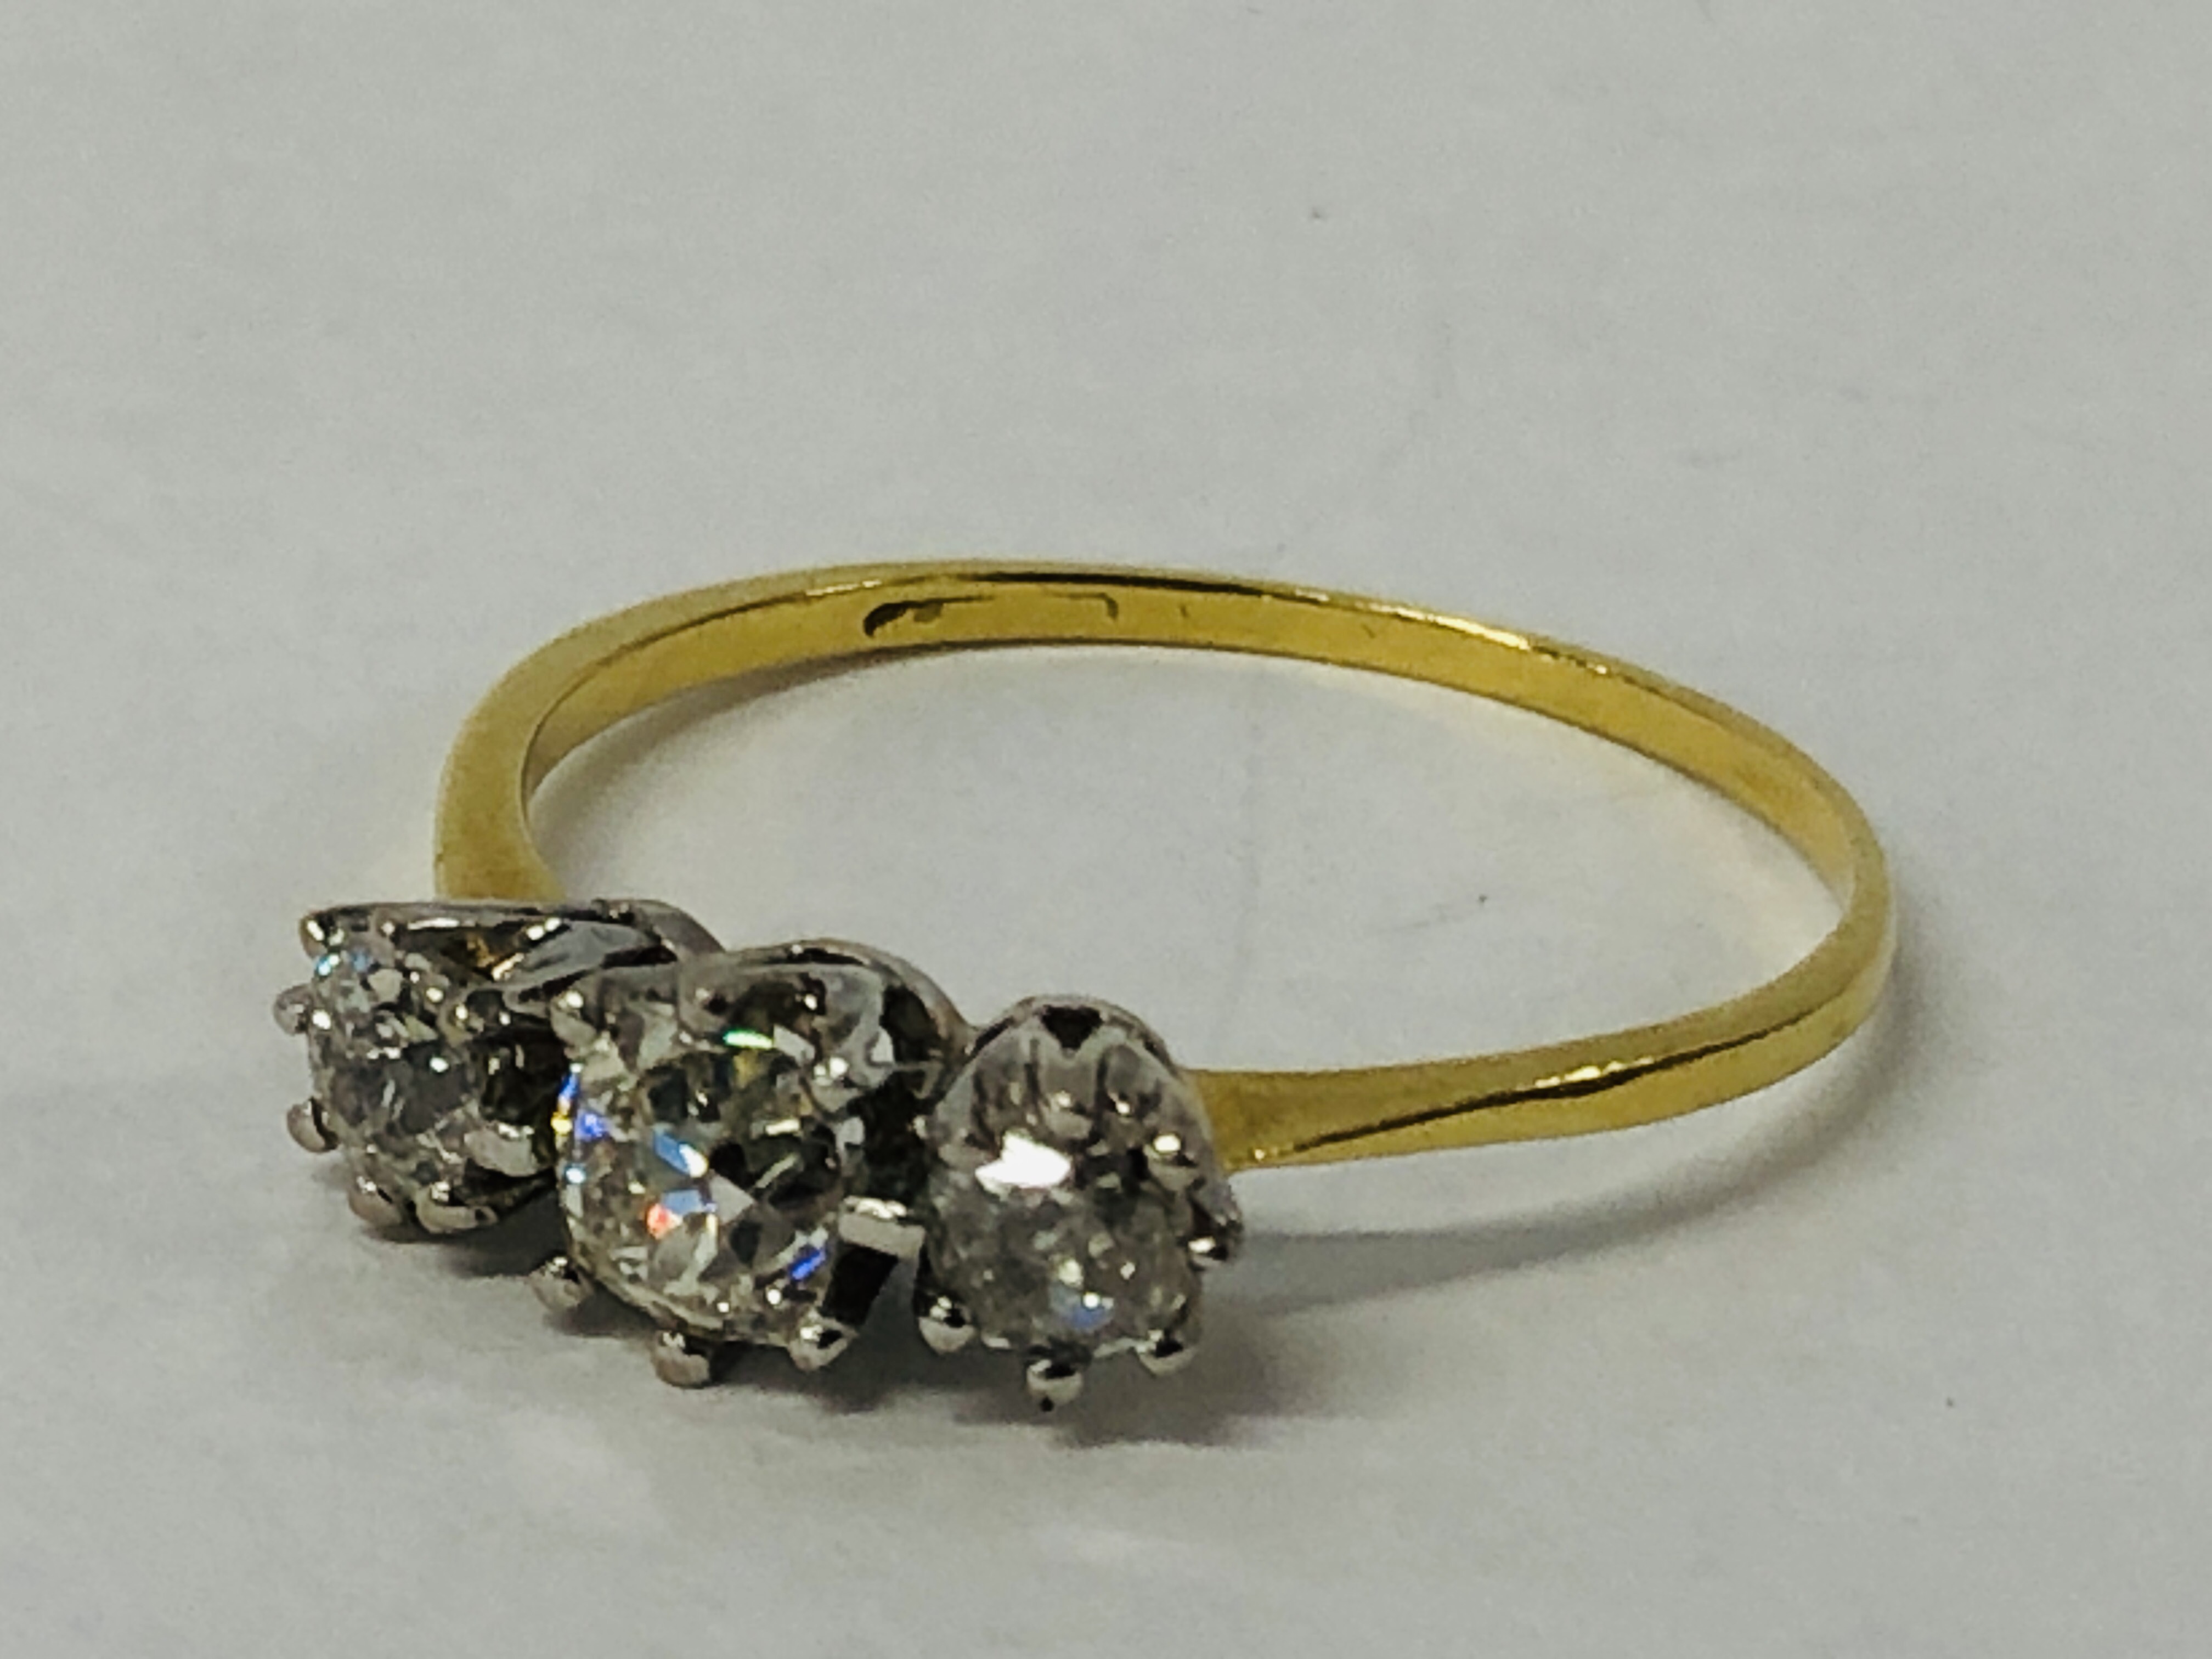 ANTIQUE YELLOW METAL (RUBBED MARKS) THREE STONE DIAMOND RING - Image 6 of 8